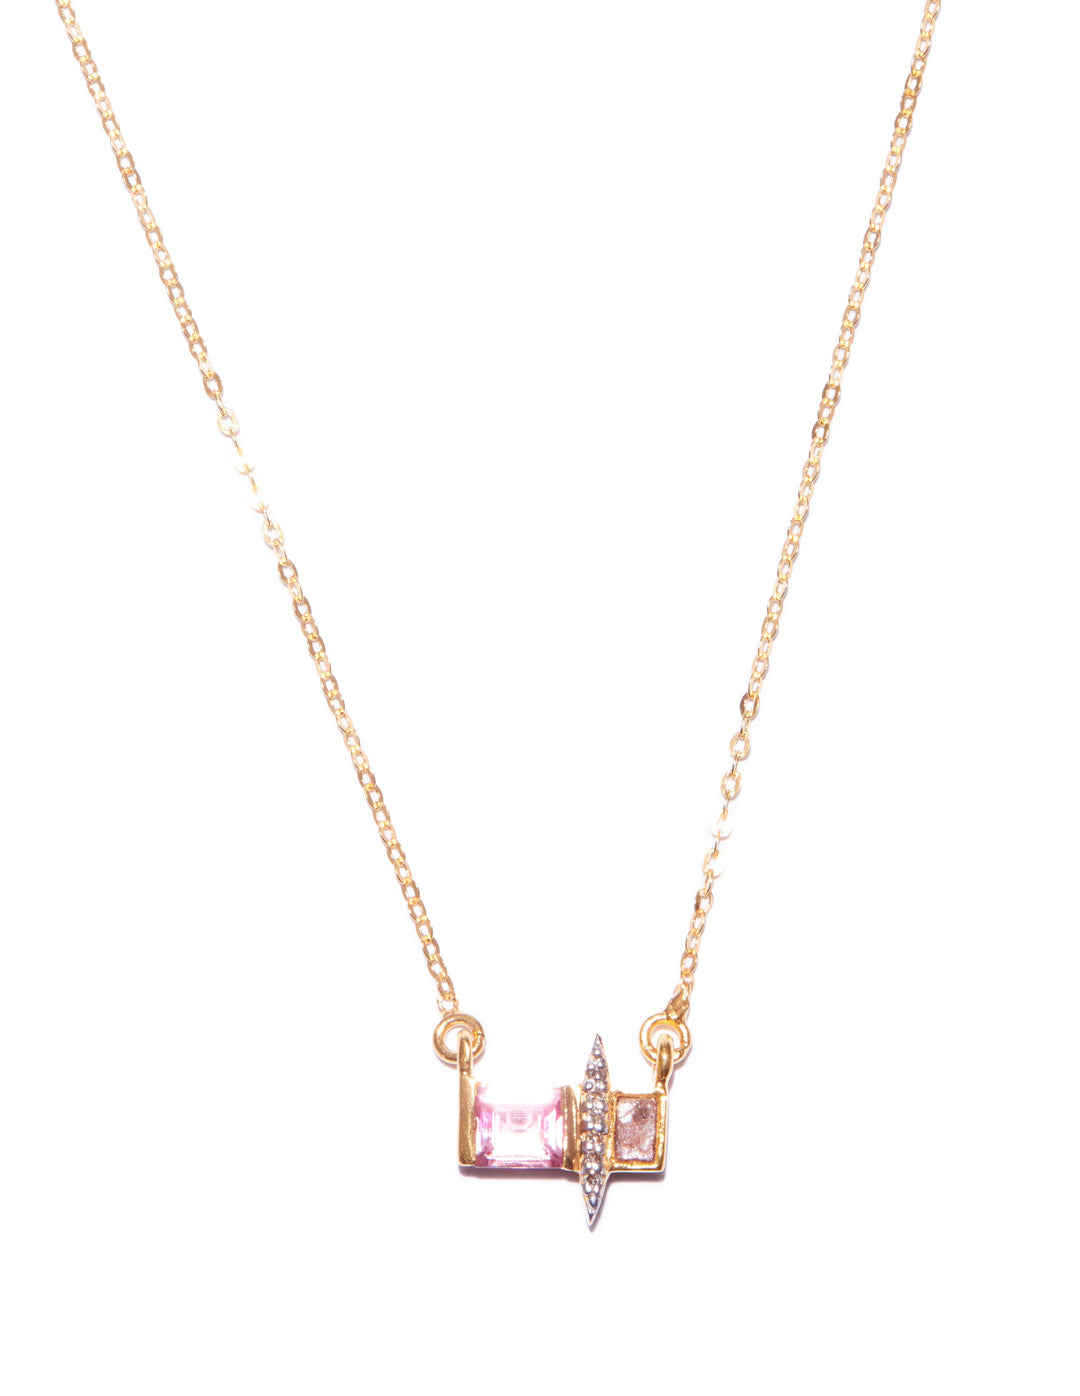 Cujas Pendant Necklace in Pink Tourmaline